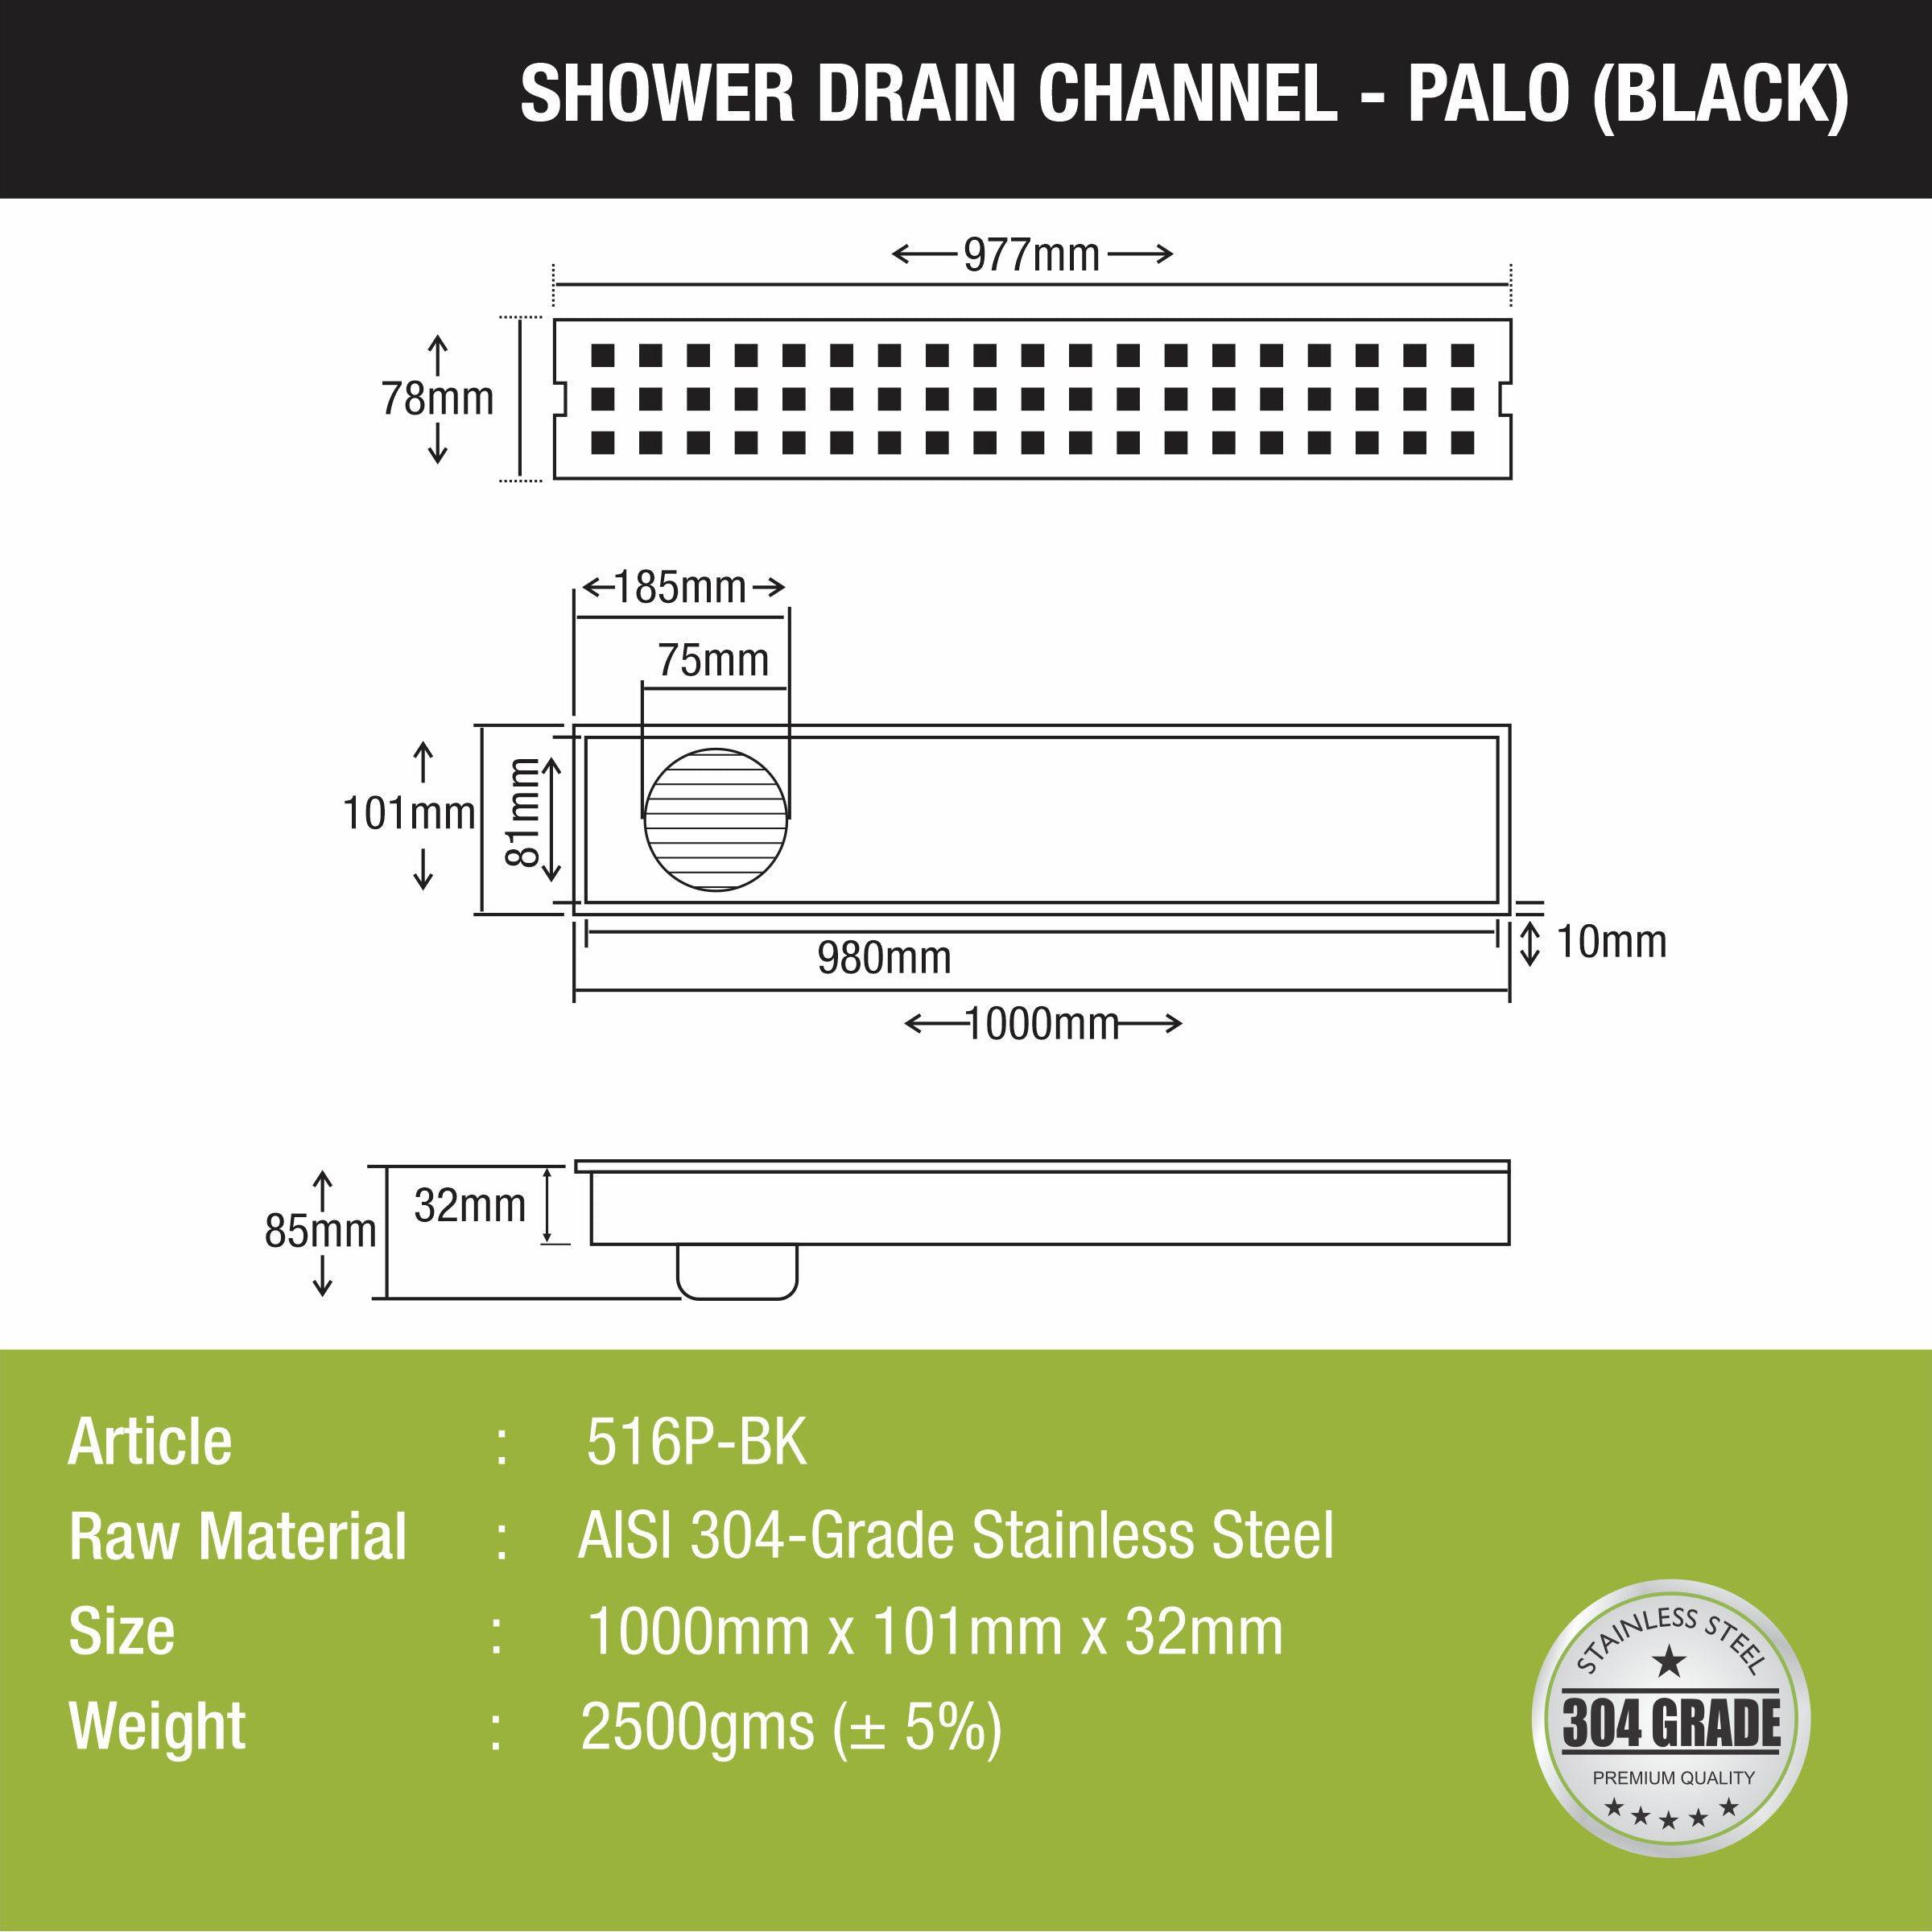 Palo Shower Drain Channel - Black (40 x 4 Inches) size and development